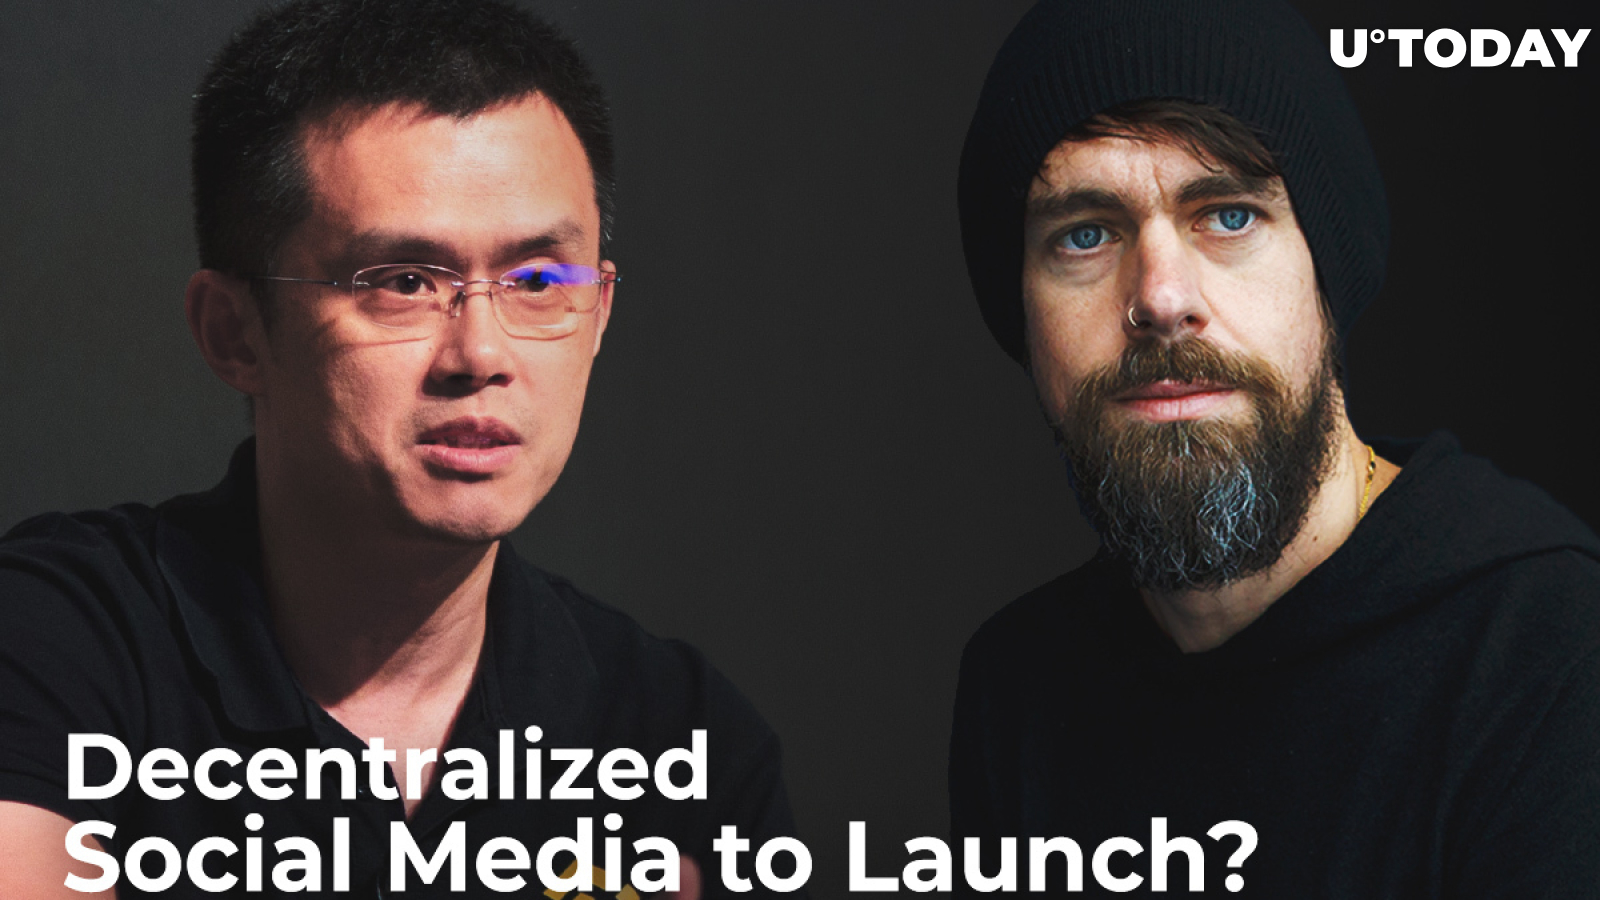 CZ Binance Offers a Hand to Jack Dorsey, Says He Must Launch Decentralized Social Media ASAP